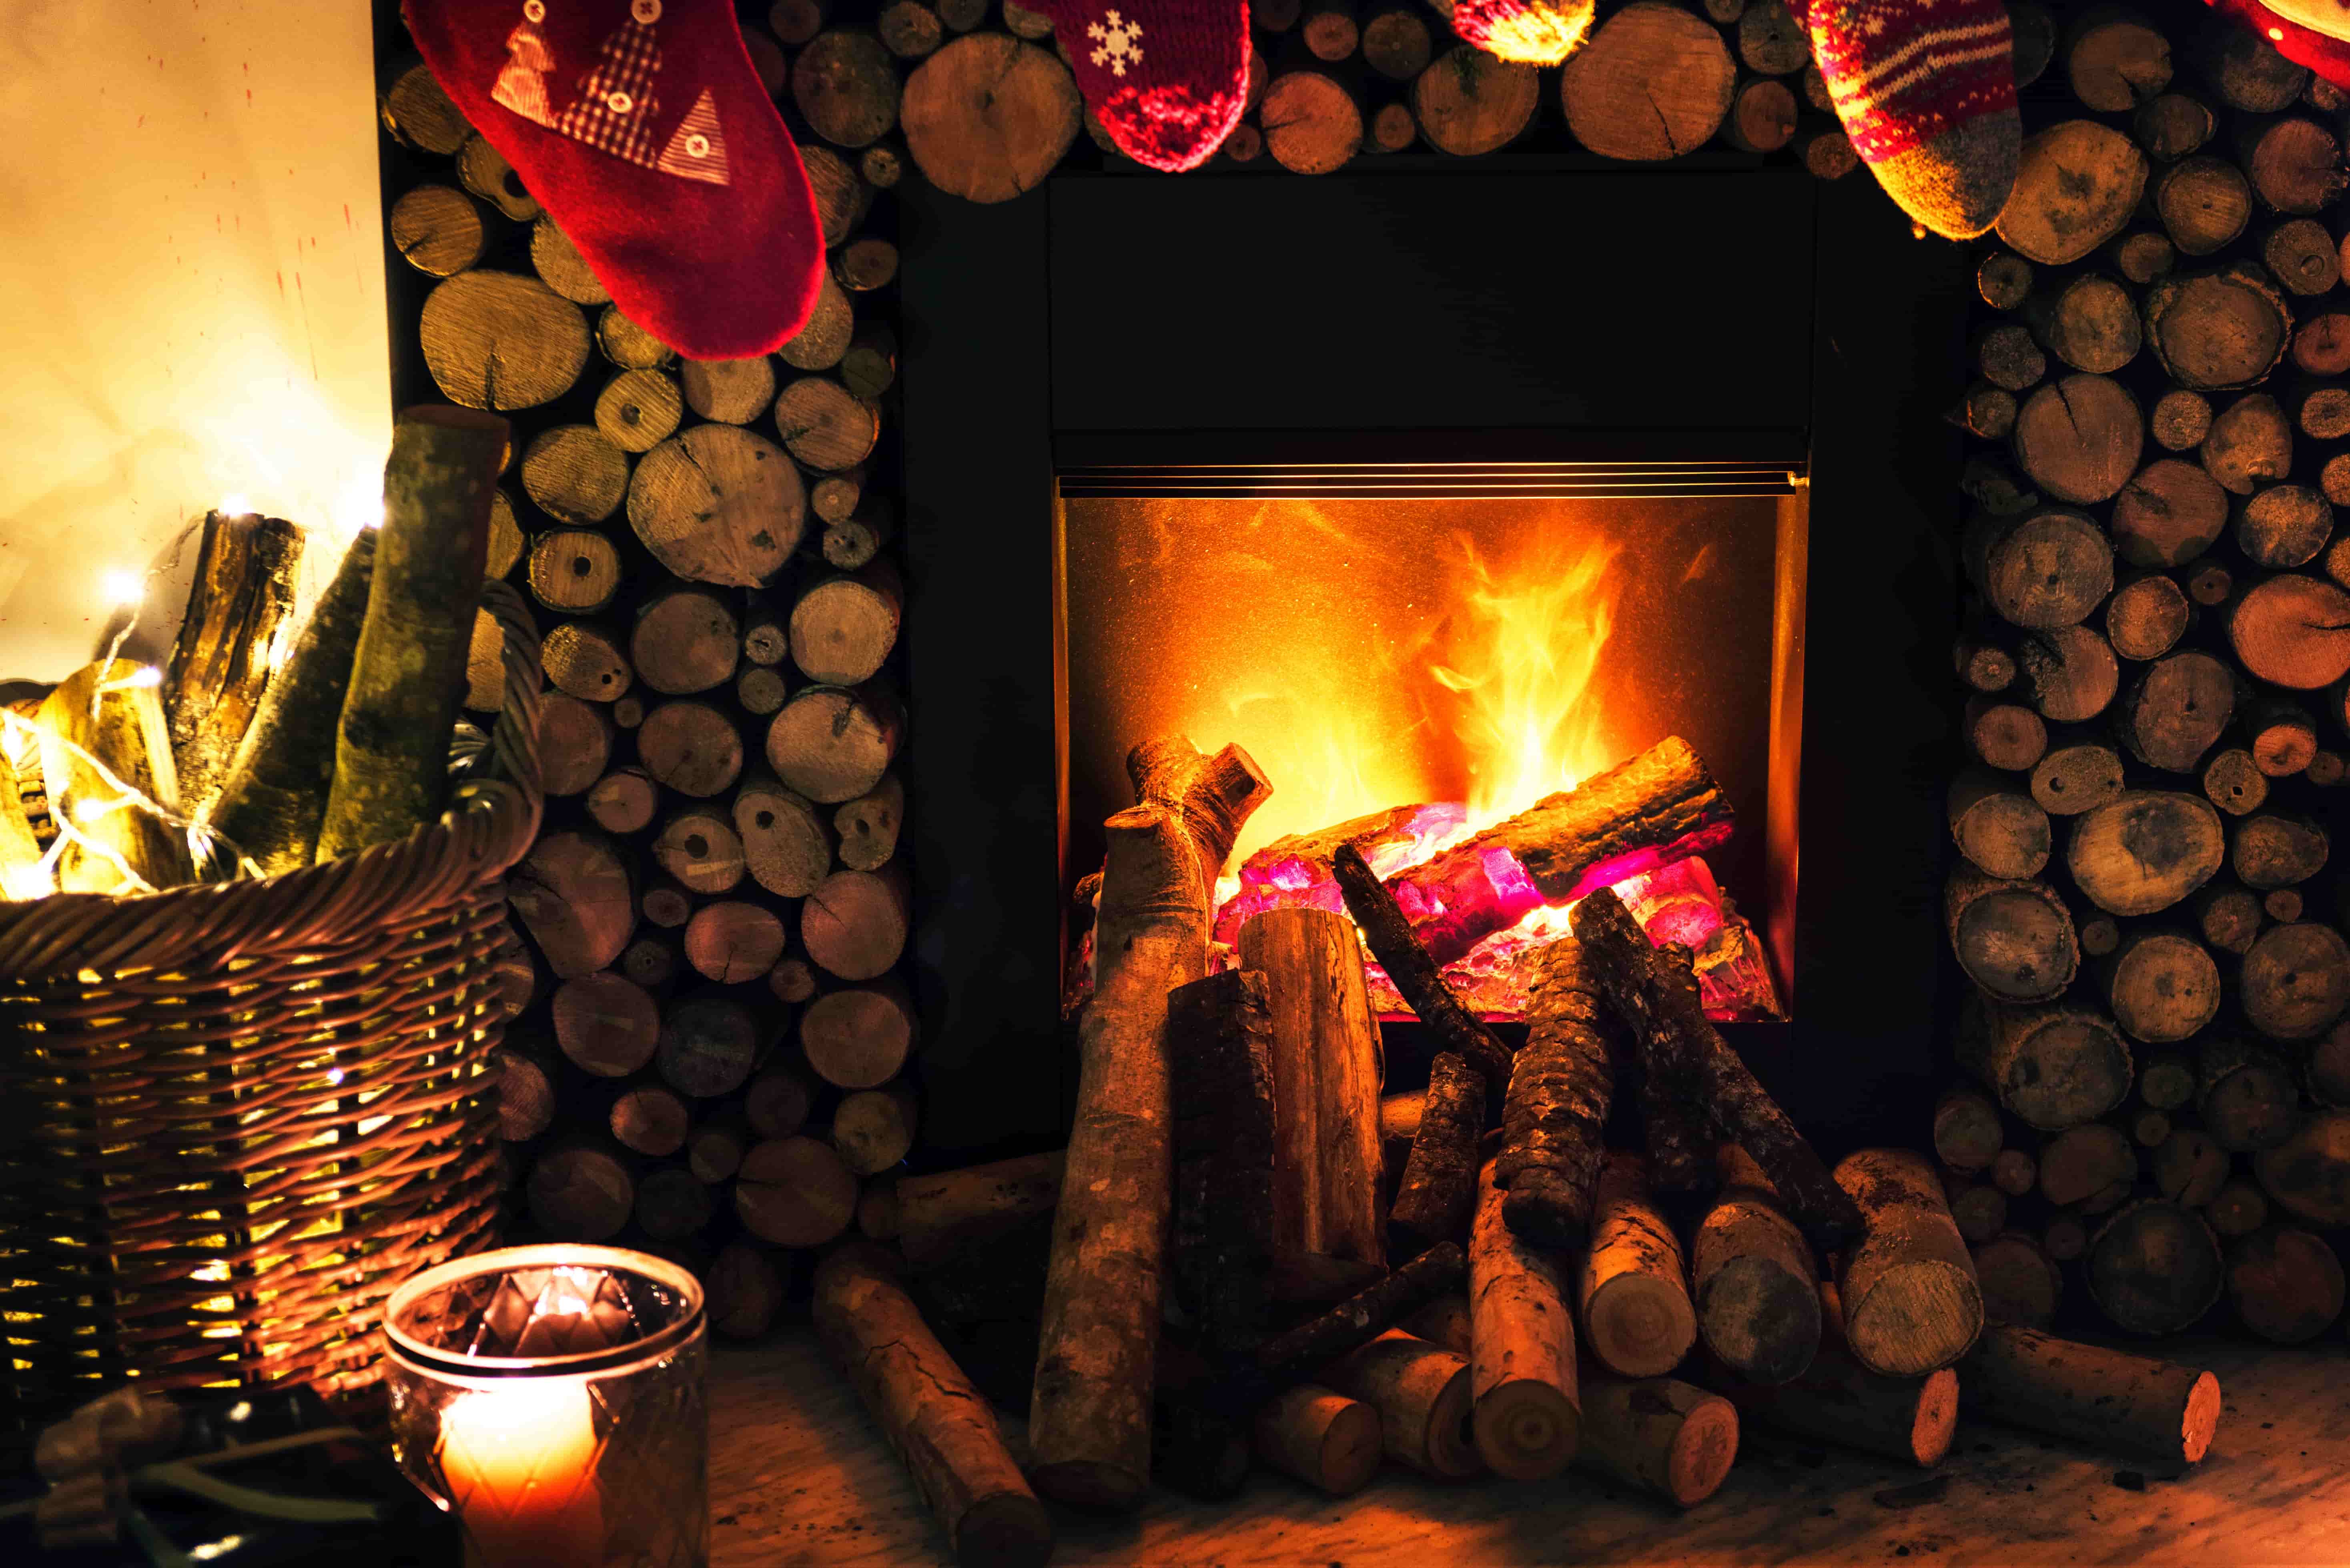 Fireplace at Christmas in a chalet